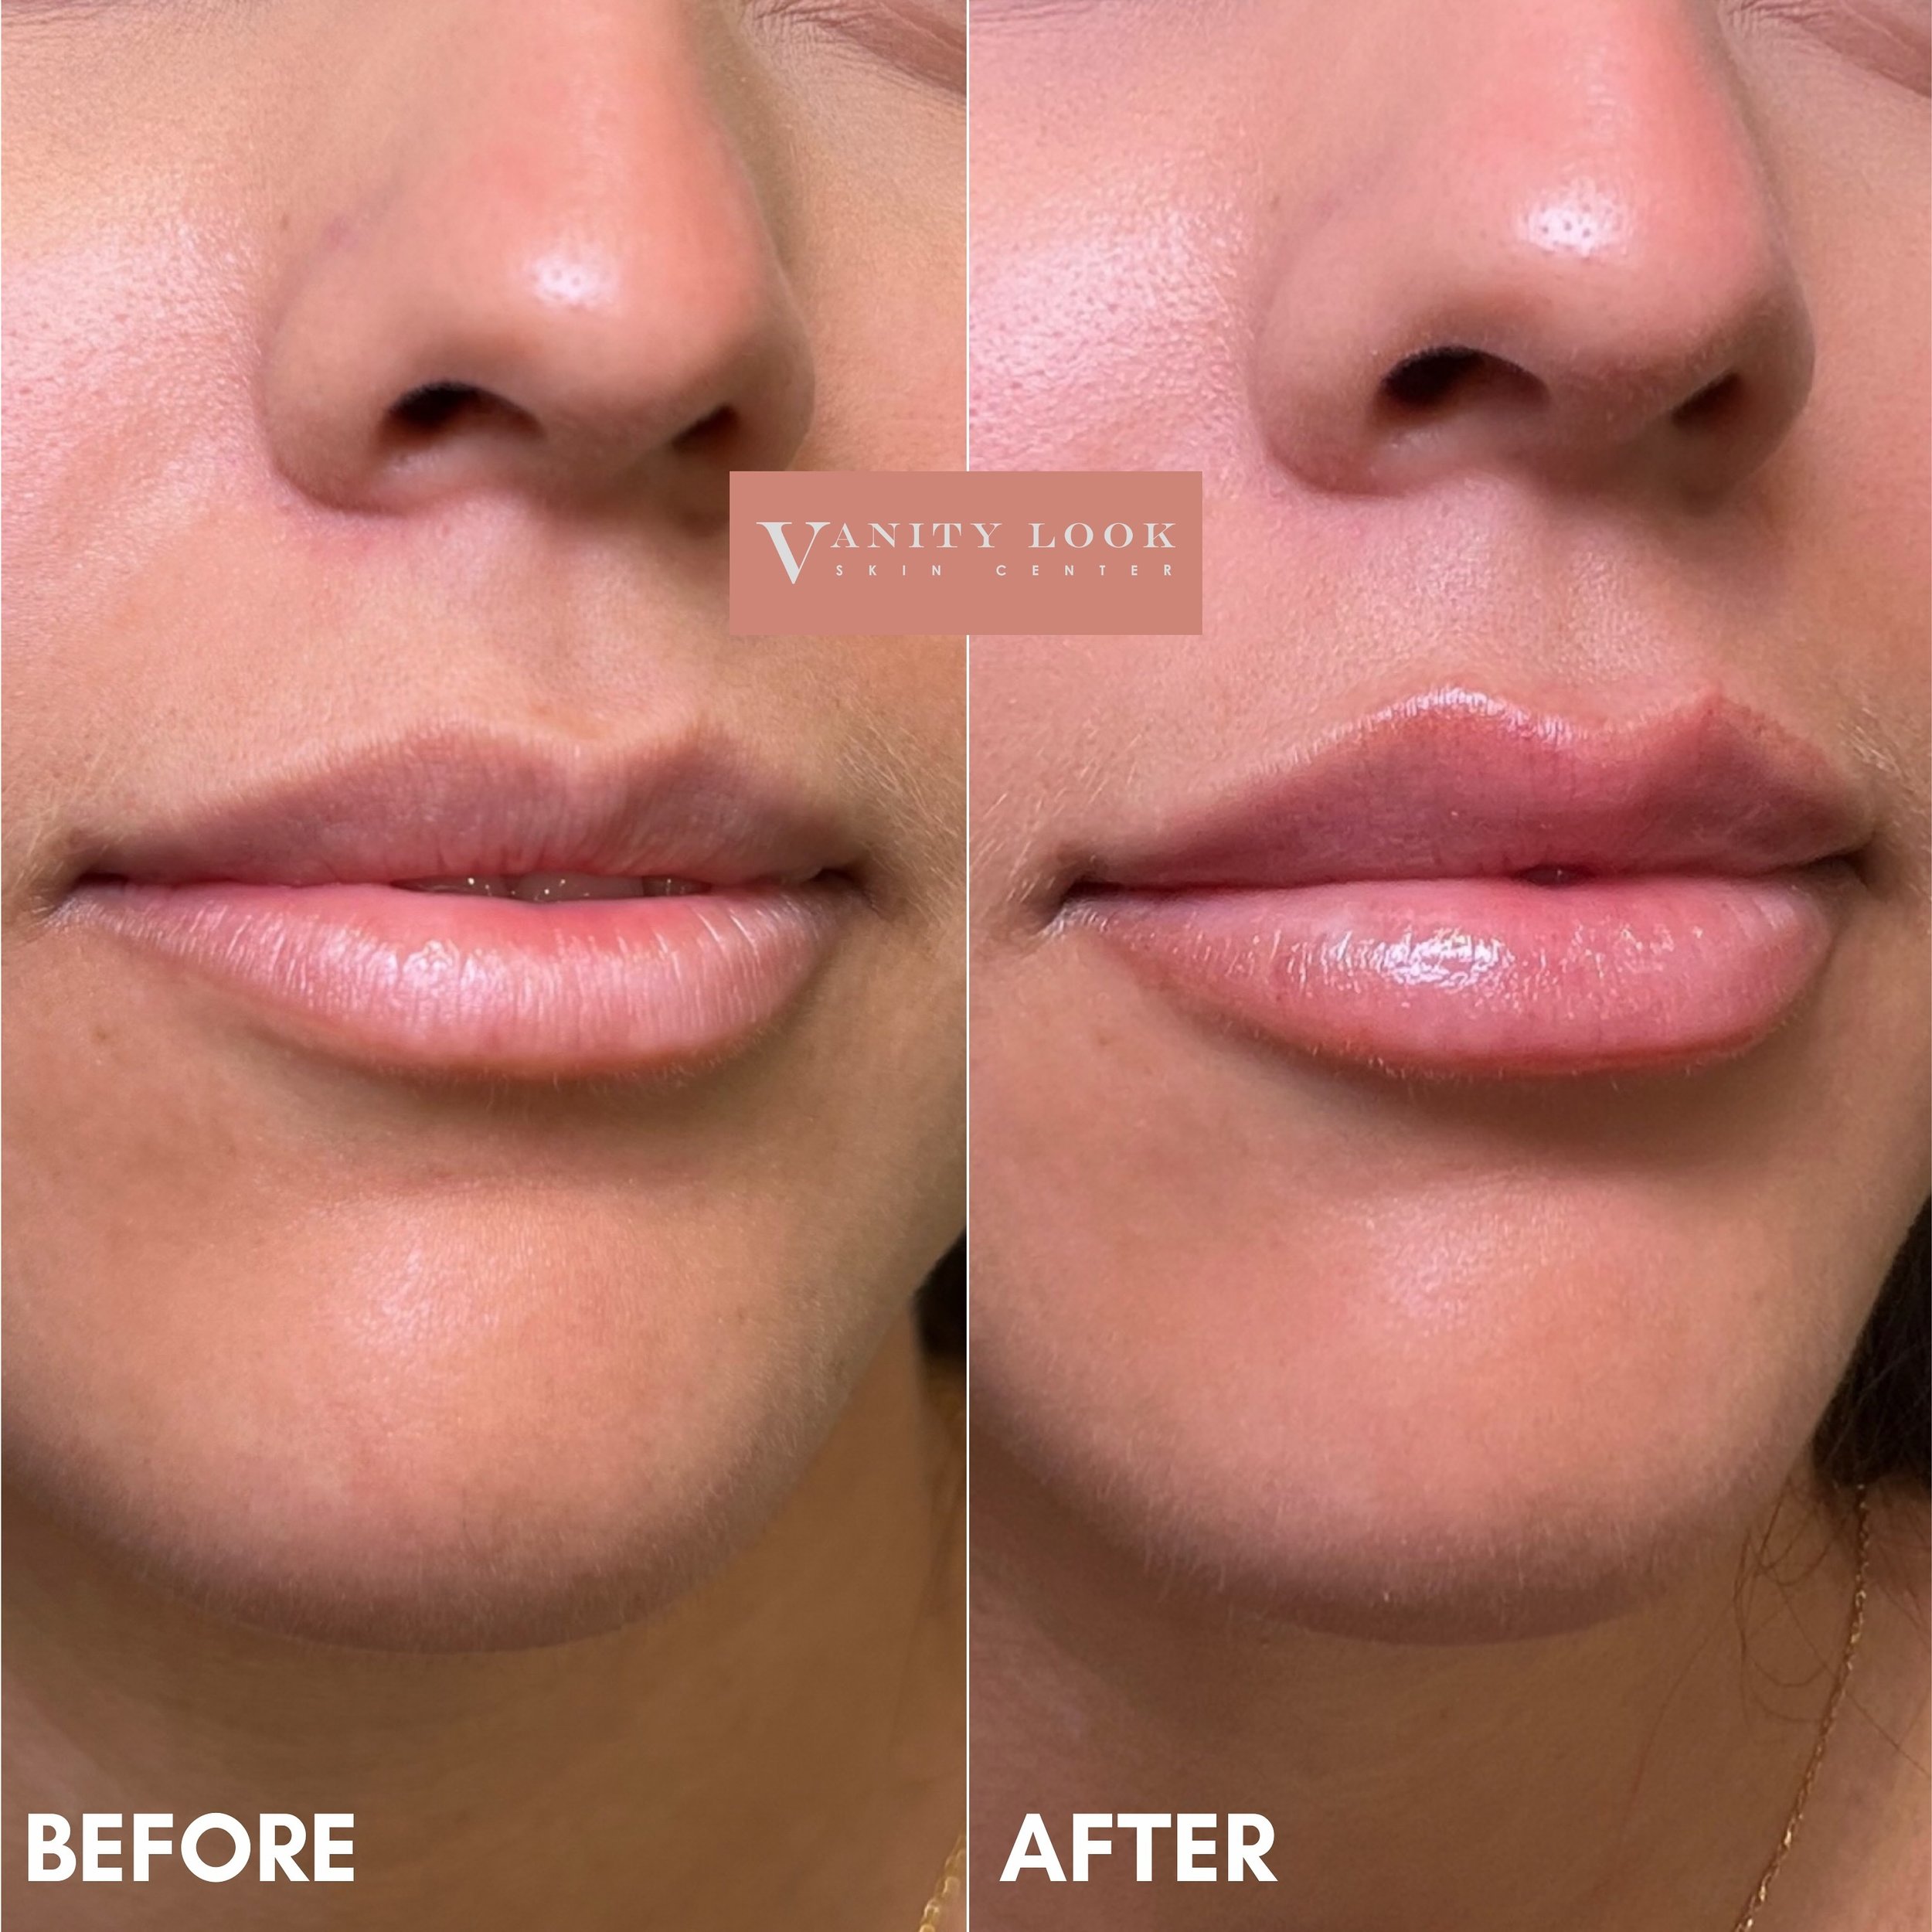 Pouty, hydrated, and defined 💉👄✨ We achieved lip height, definition, and hydration with this lip filler result 💋

Services we offer:
▪️ Fillers
▪️ Botox &amp; Dysport
▪️ Facial Balancing
▪️ Laser Hair Removal
▪️ Skin Rejuvenation
▪️ Morpheus8 for 